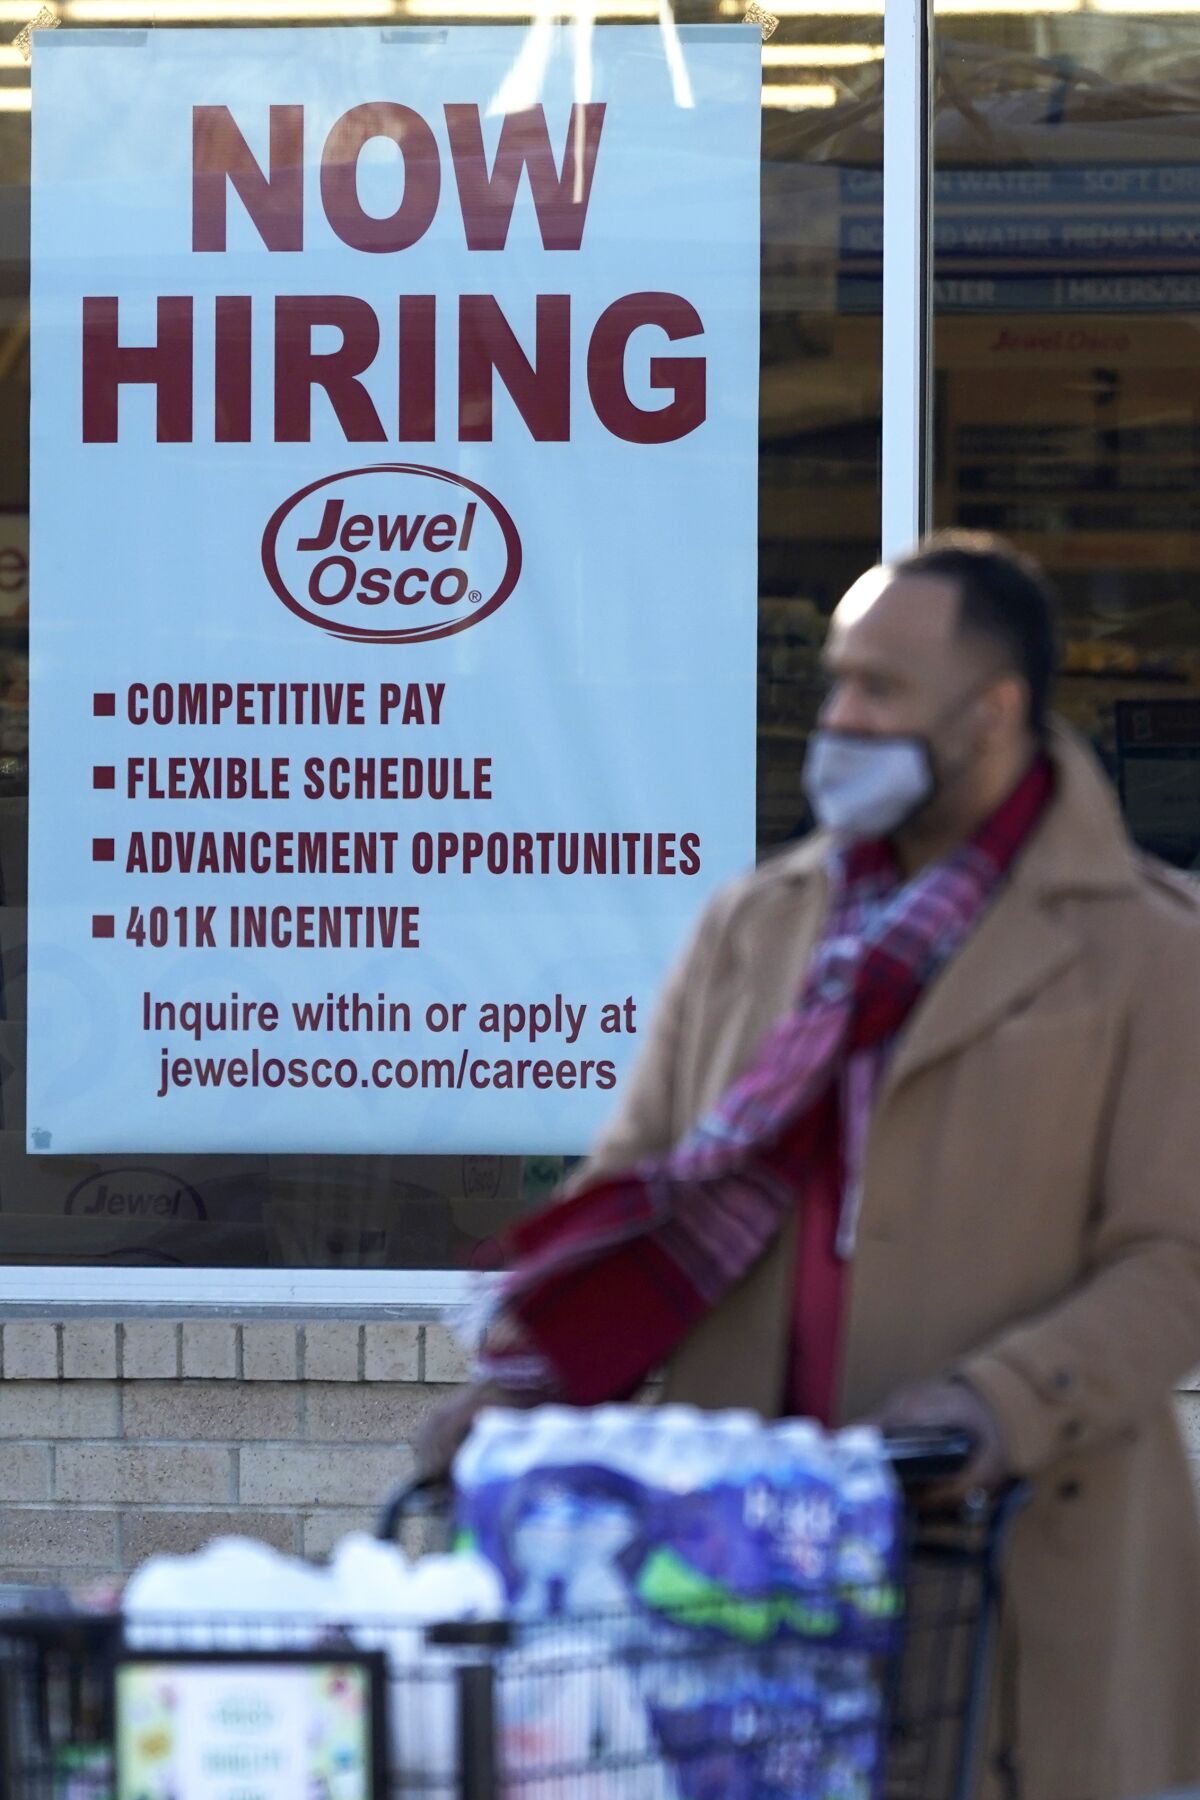 A now-hiring sign is shown as a shopper exits a grocery store Dec. 4 in Deerfield, Ill.